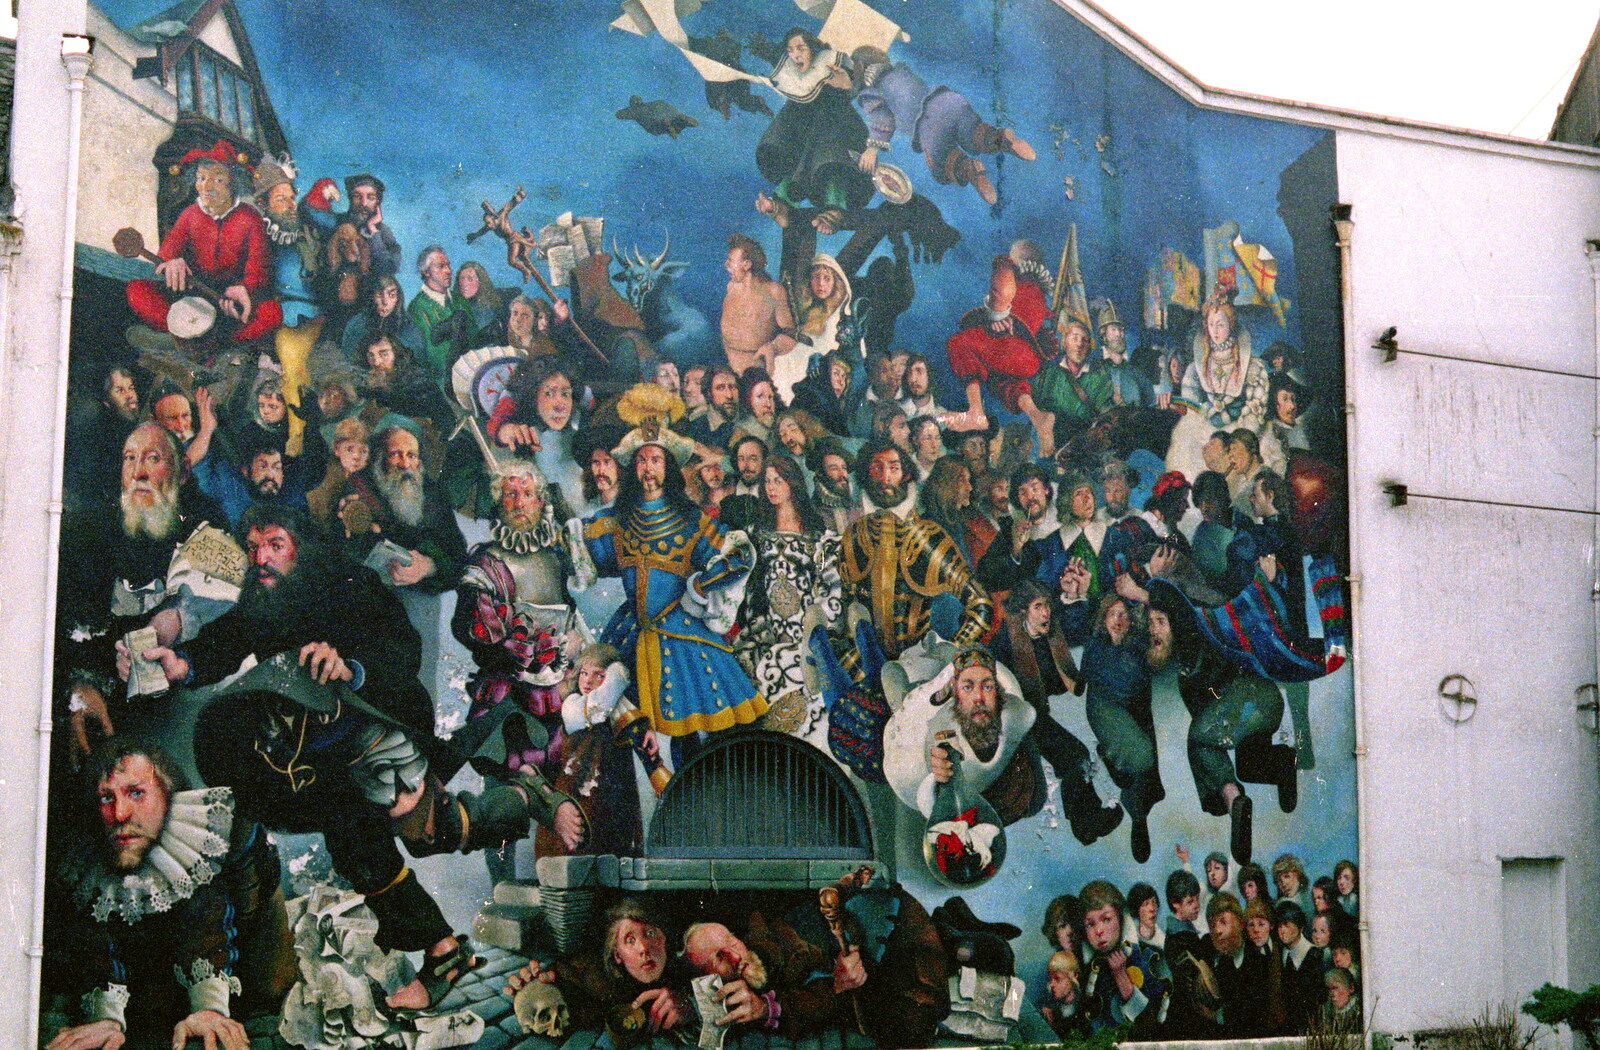 Another Robert Lenkiewicz mural from Uni: The End of Term and Whitsand Bay, Plymouth and New Milton - 21st March 1986